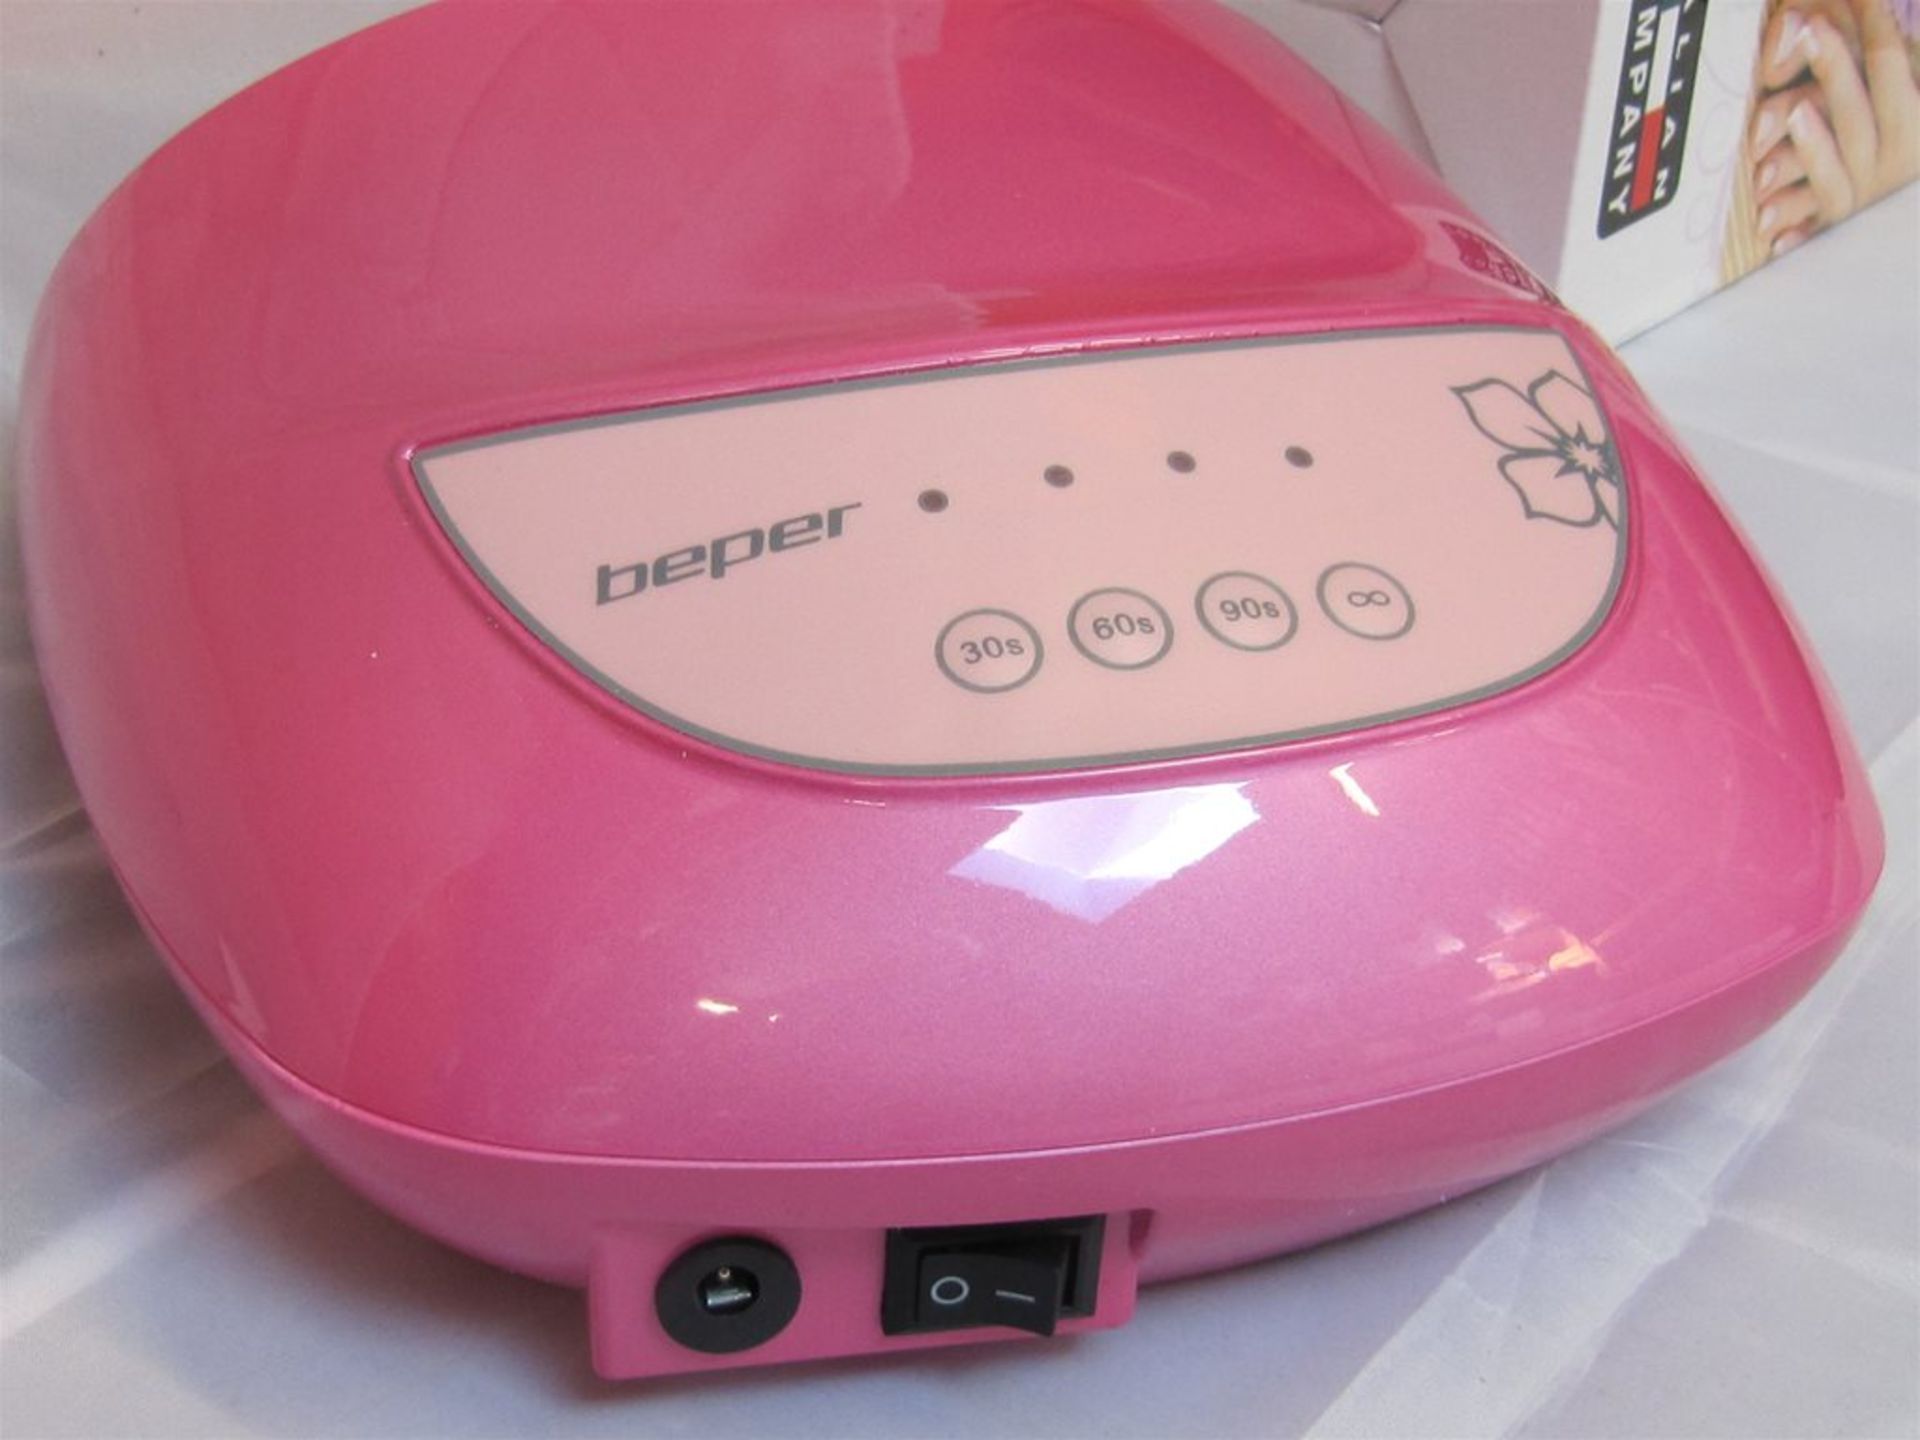 160) Beper LED Nail Lamp. 12w Rapid Dry Time. No vat on Hammer. - Image 2 of 4